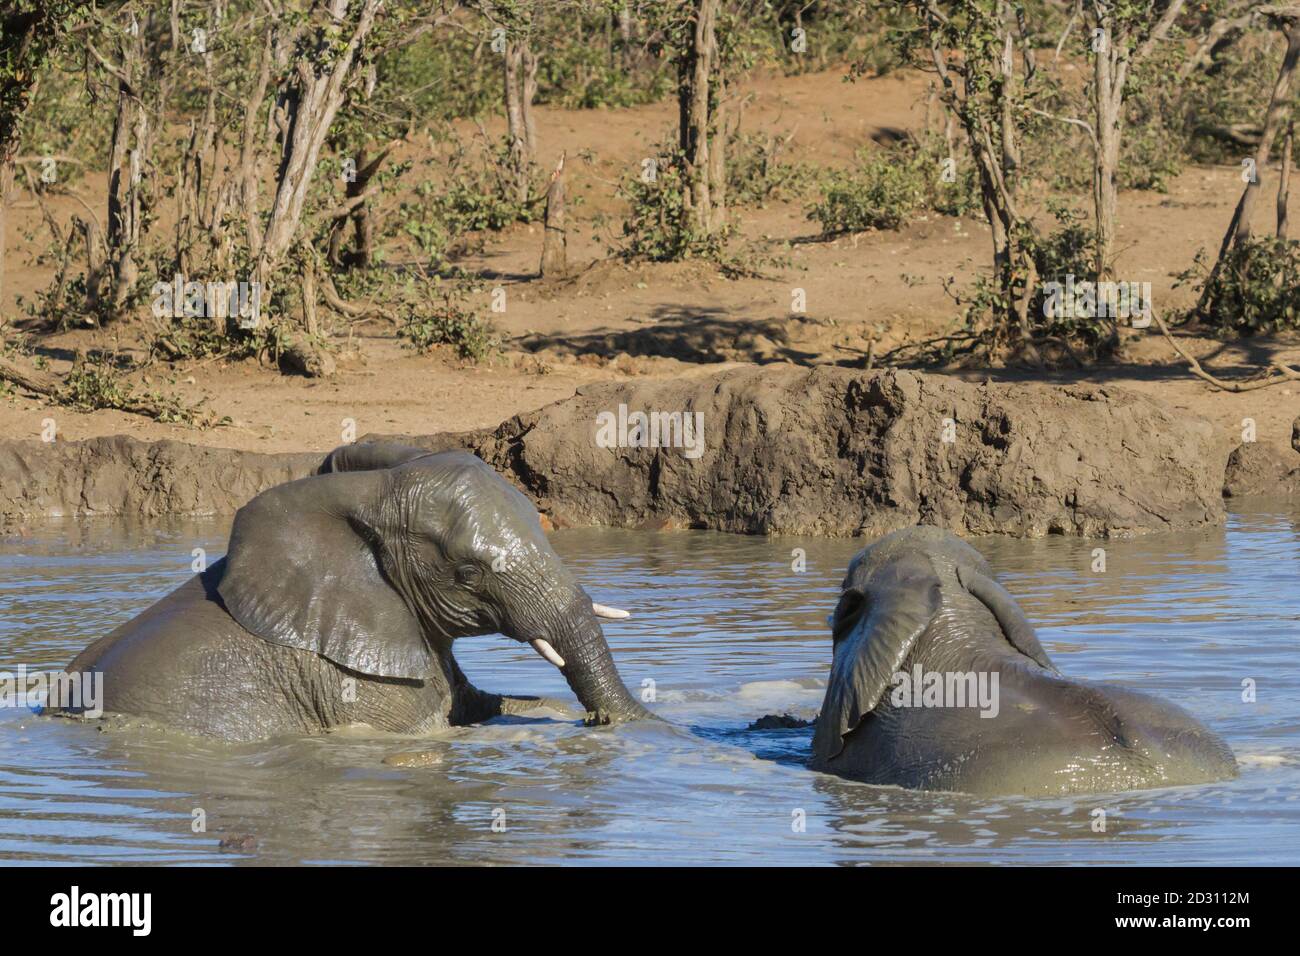 Closeup of elephants (Loxodanta africana) swimming and playing in a waterhole in Kruger National Park, South Africa Stock Photo